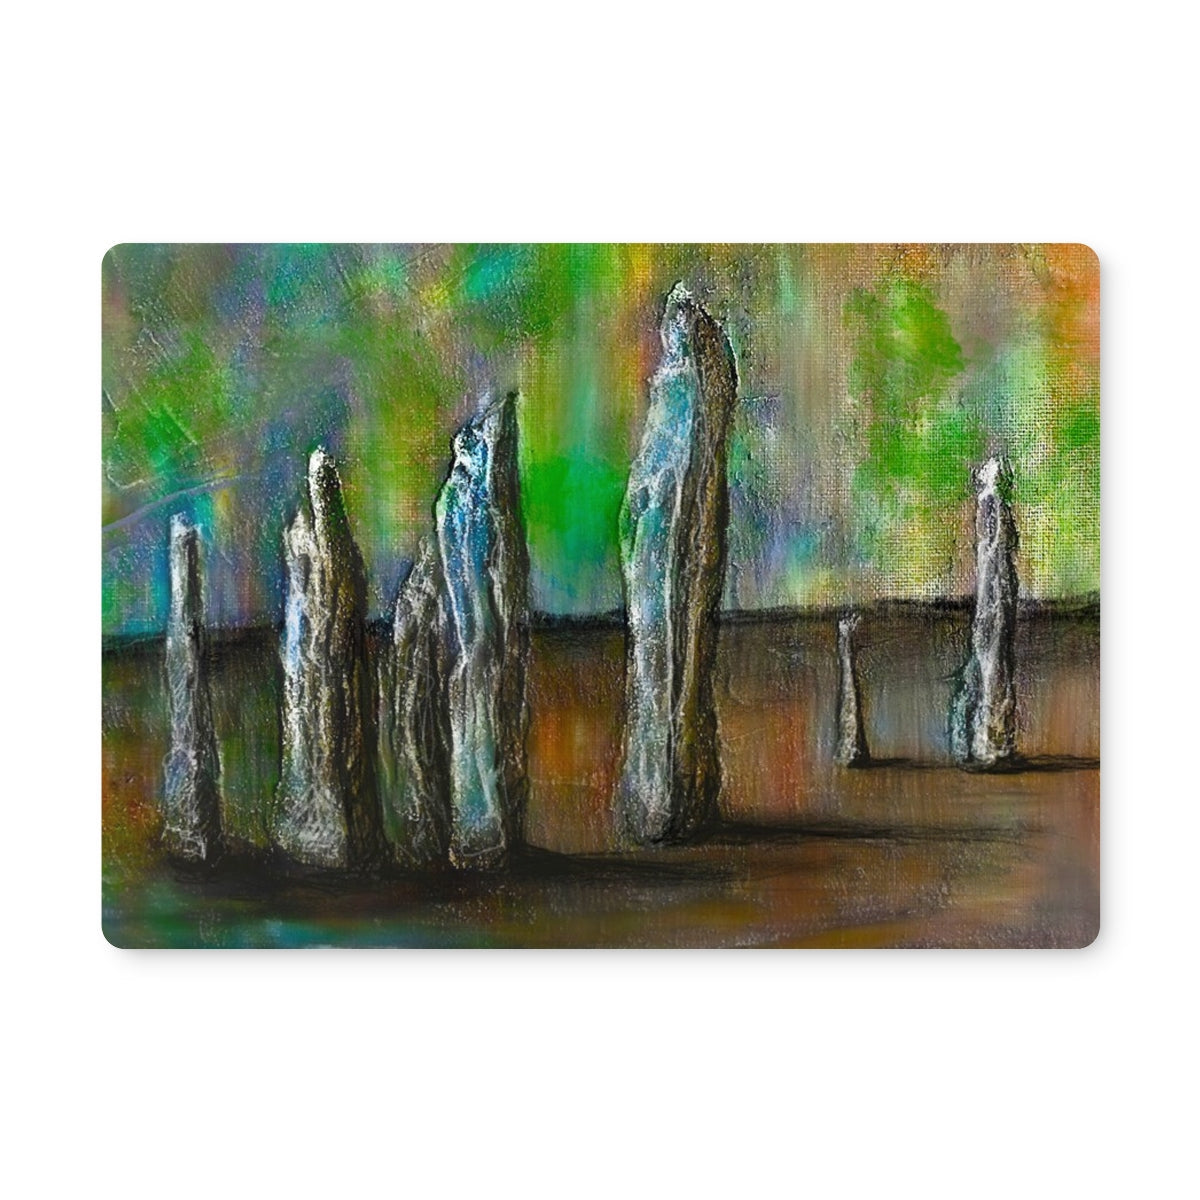 Callanish Northern Lights Art Gifts Placemat-Placemats-Hebridean Islands Art Gallery-6 Placemats-Paintings, Prints, Homeware, Art Gifts From Scotland By Scottish Artist Kevin Hunter